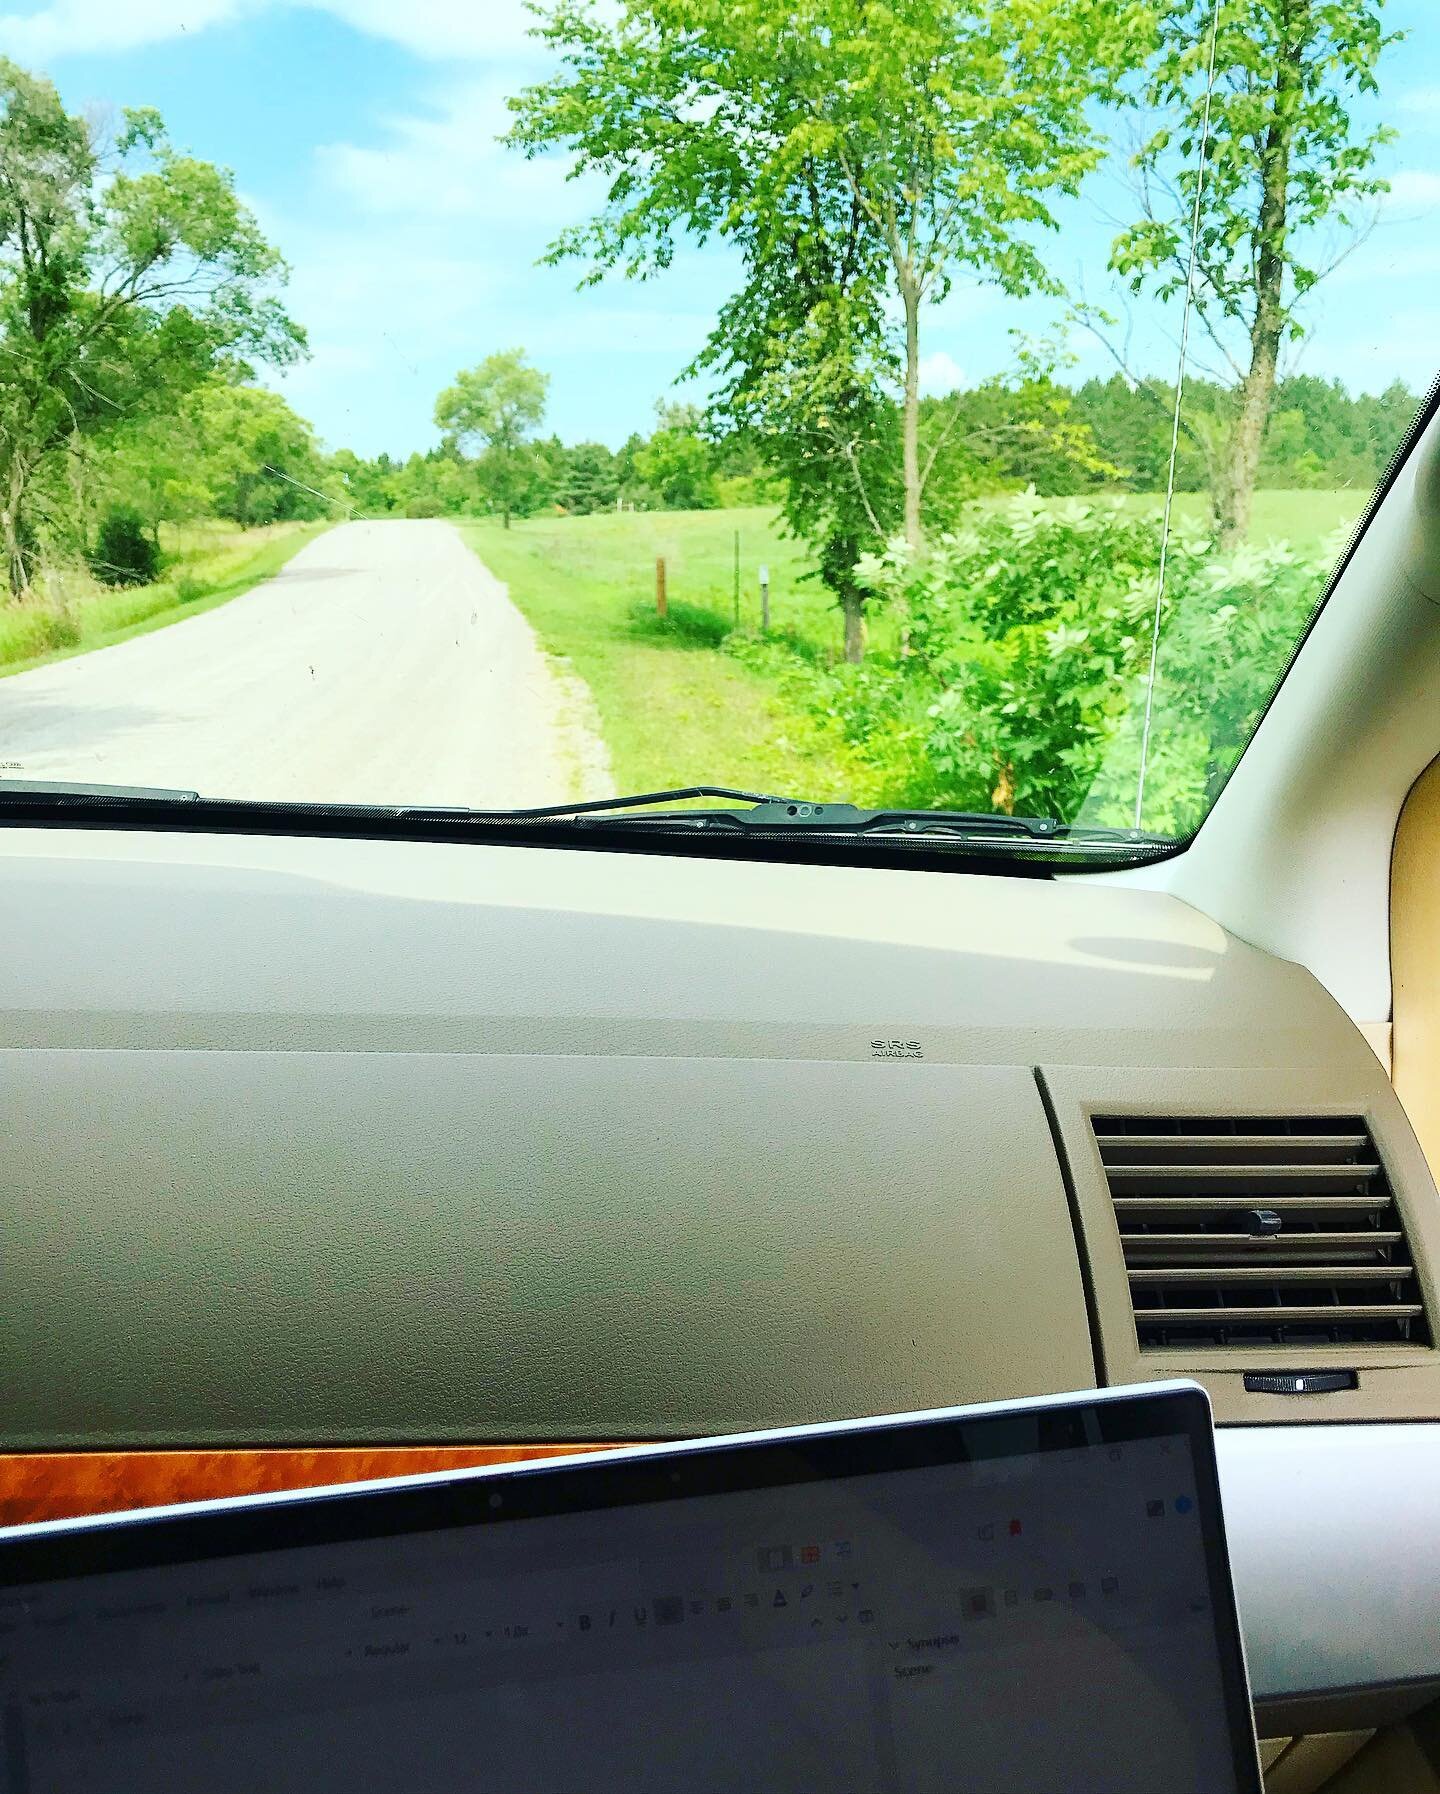 My office today for writing. It's a place I often come when I need to think, pray, write, or just have some quiet time.
.
Why are these trees, these woods so sacred to me? 
.
Maybe it's because they've comforted me, helped me hear God--in His creatio